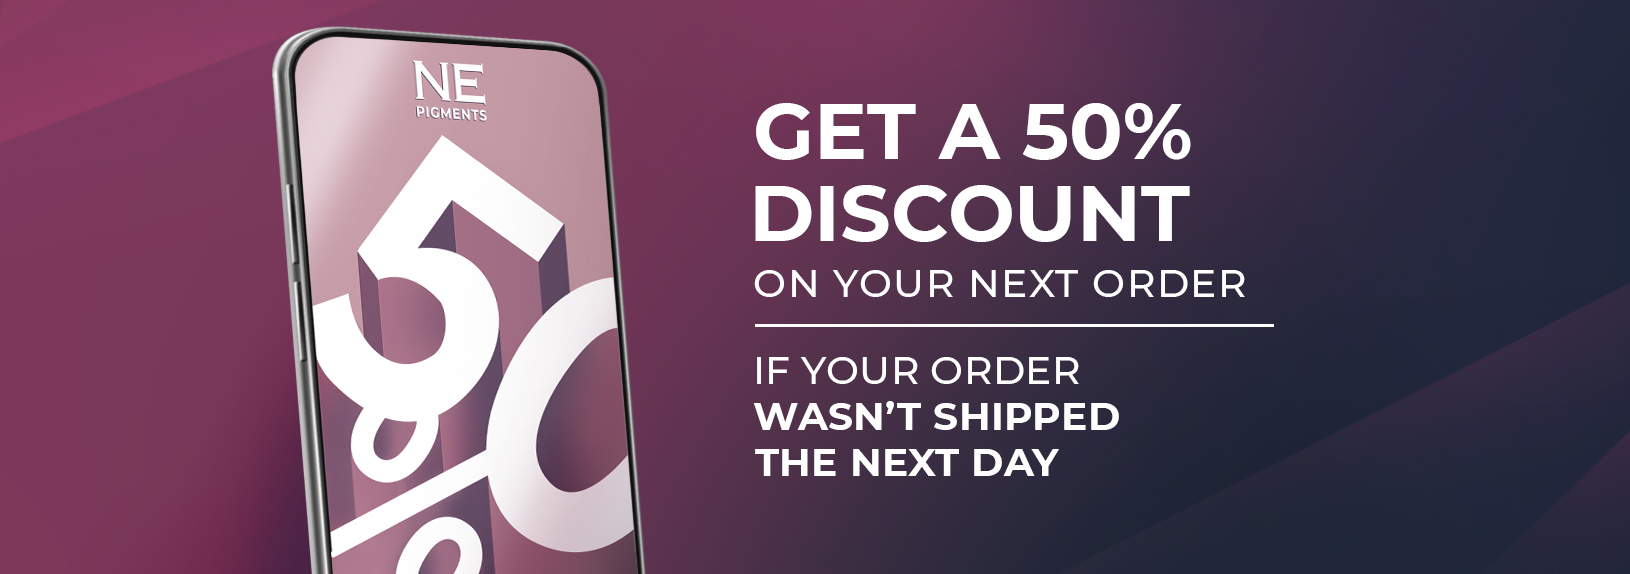  Get 50% discount on your next order